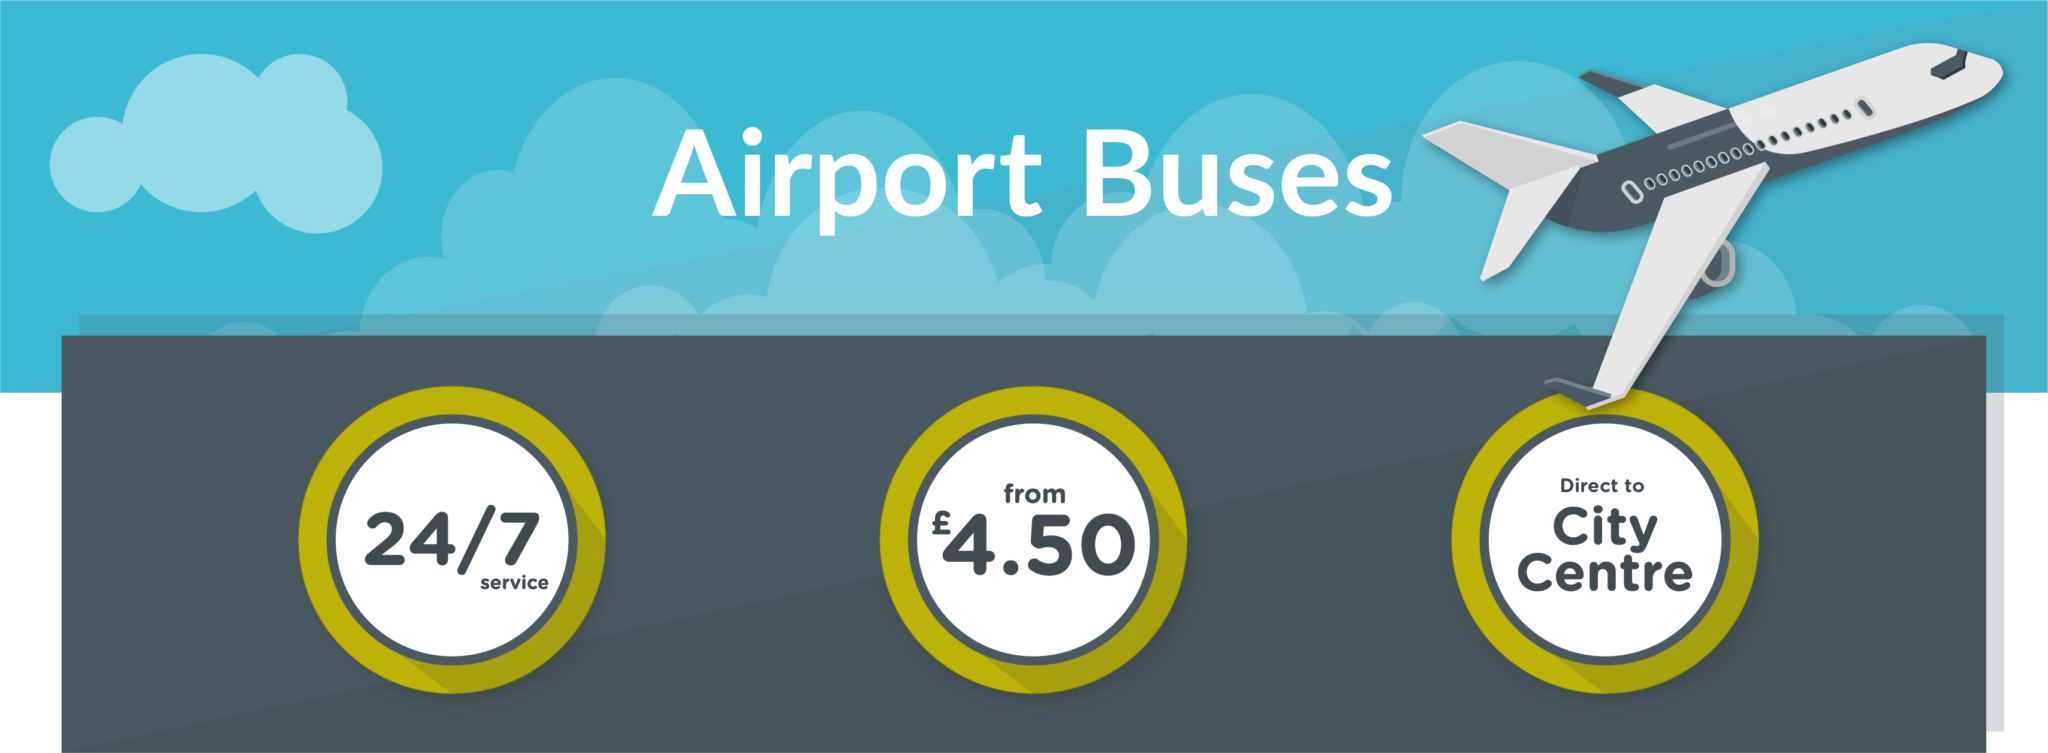 Airport Buses - 24/7 service, prices from £4.50, direct to city centre